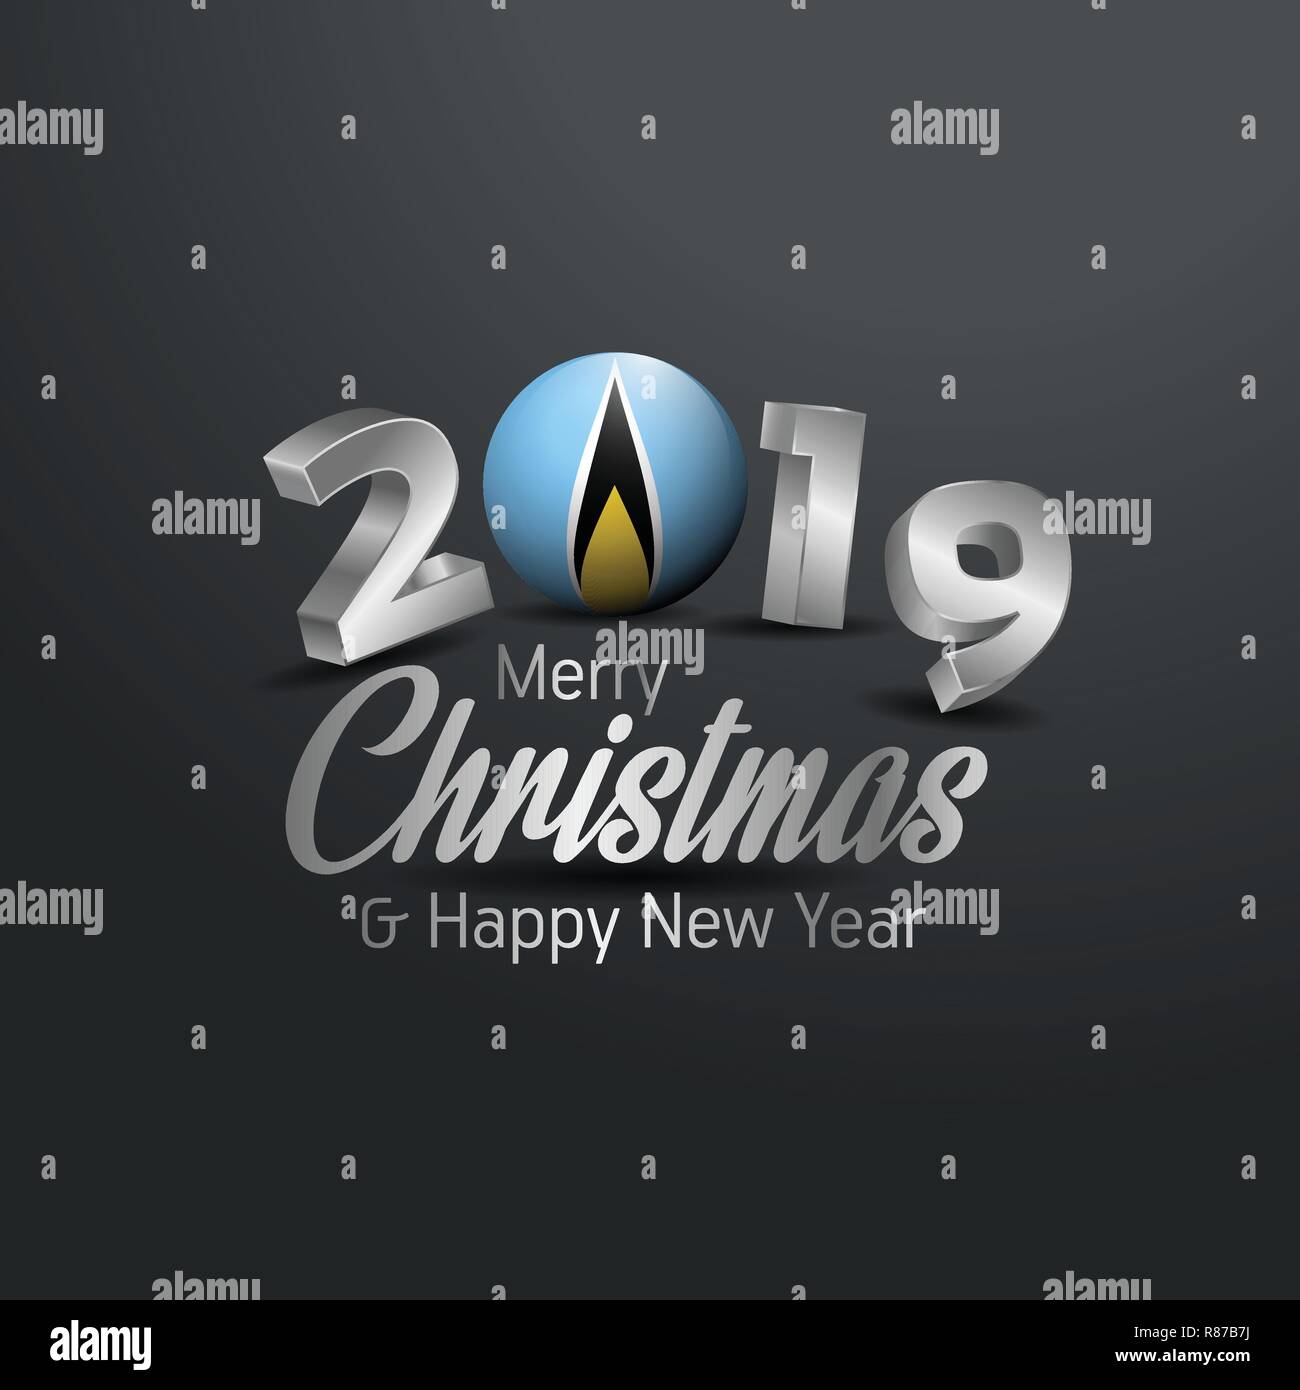 Saint Lucia Flag 2019 Merry Christmas Typography. New Year Abstract Celebration background Stock Vector